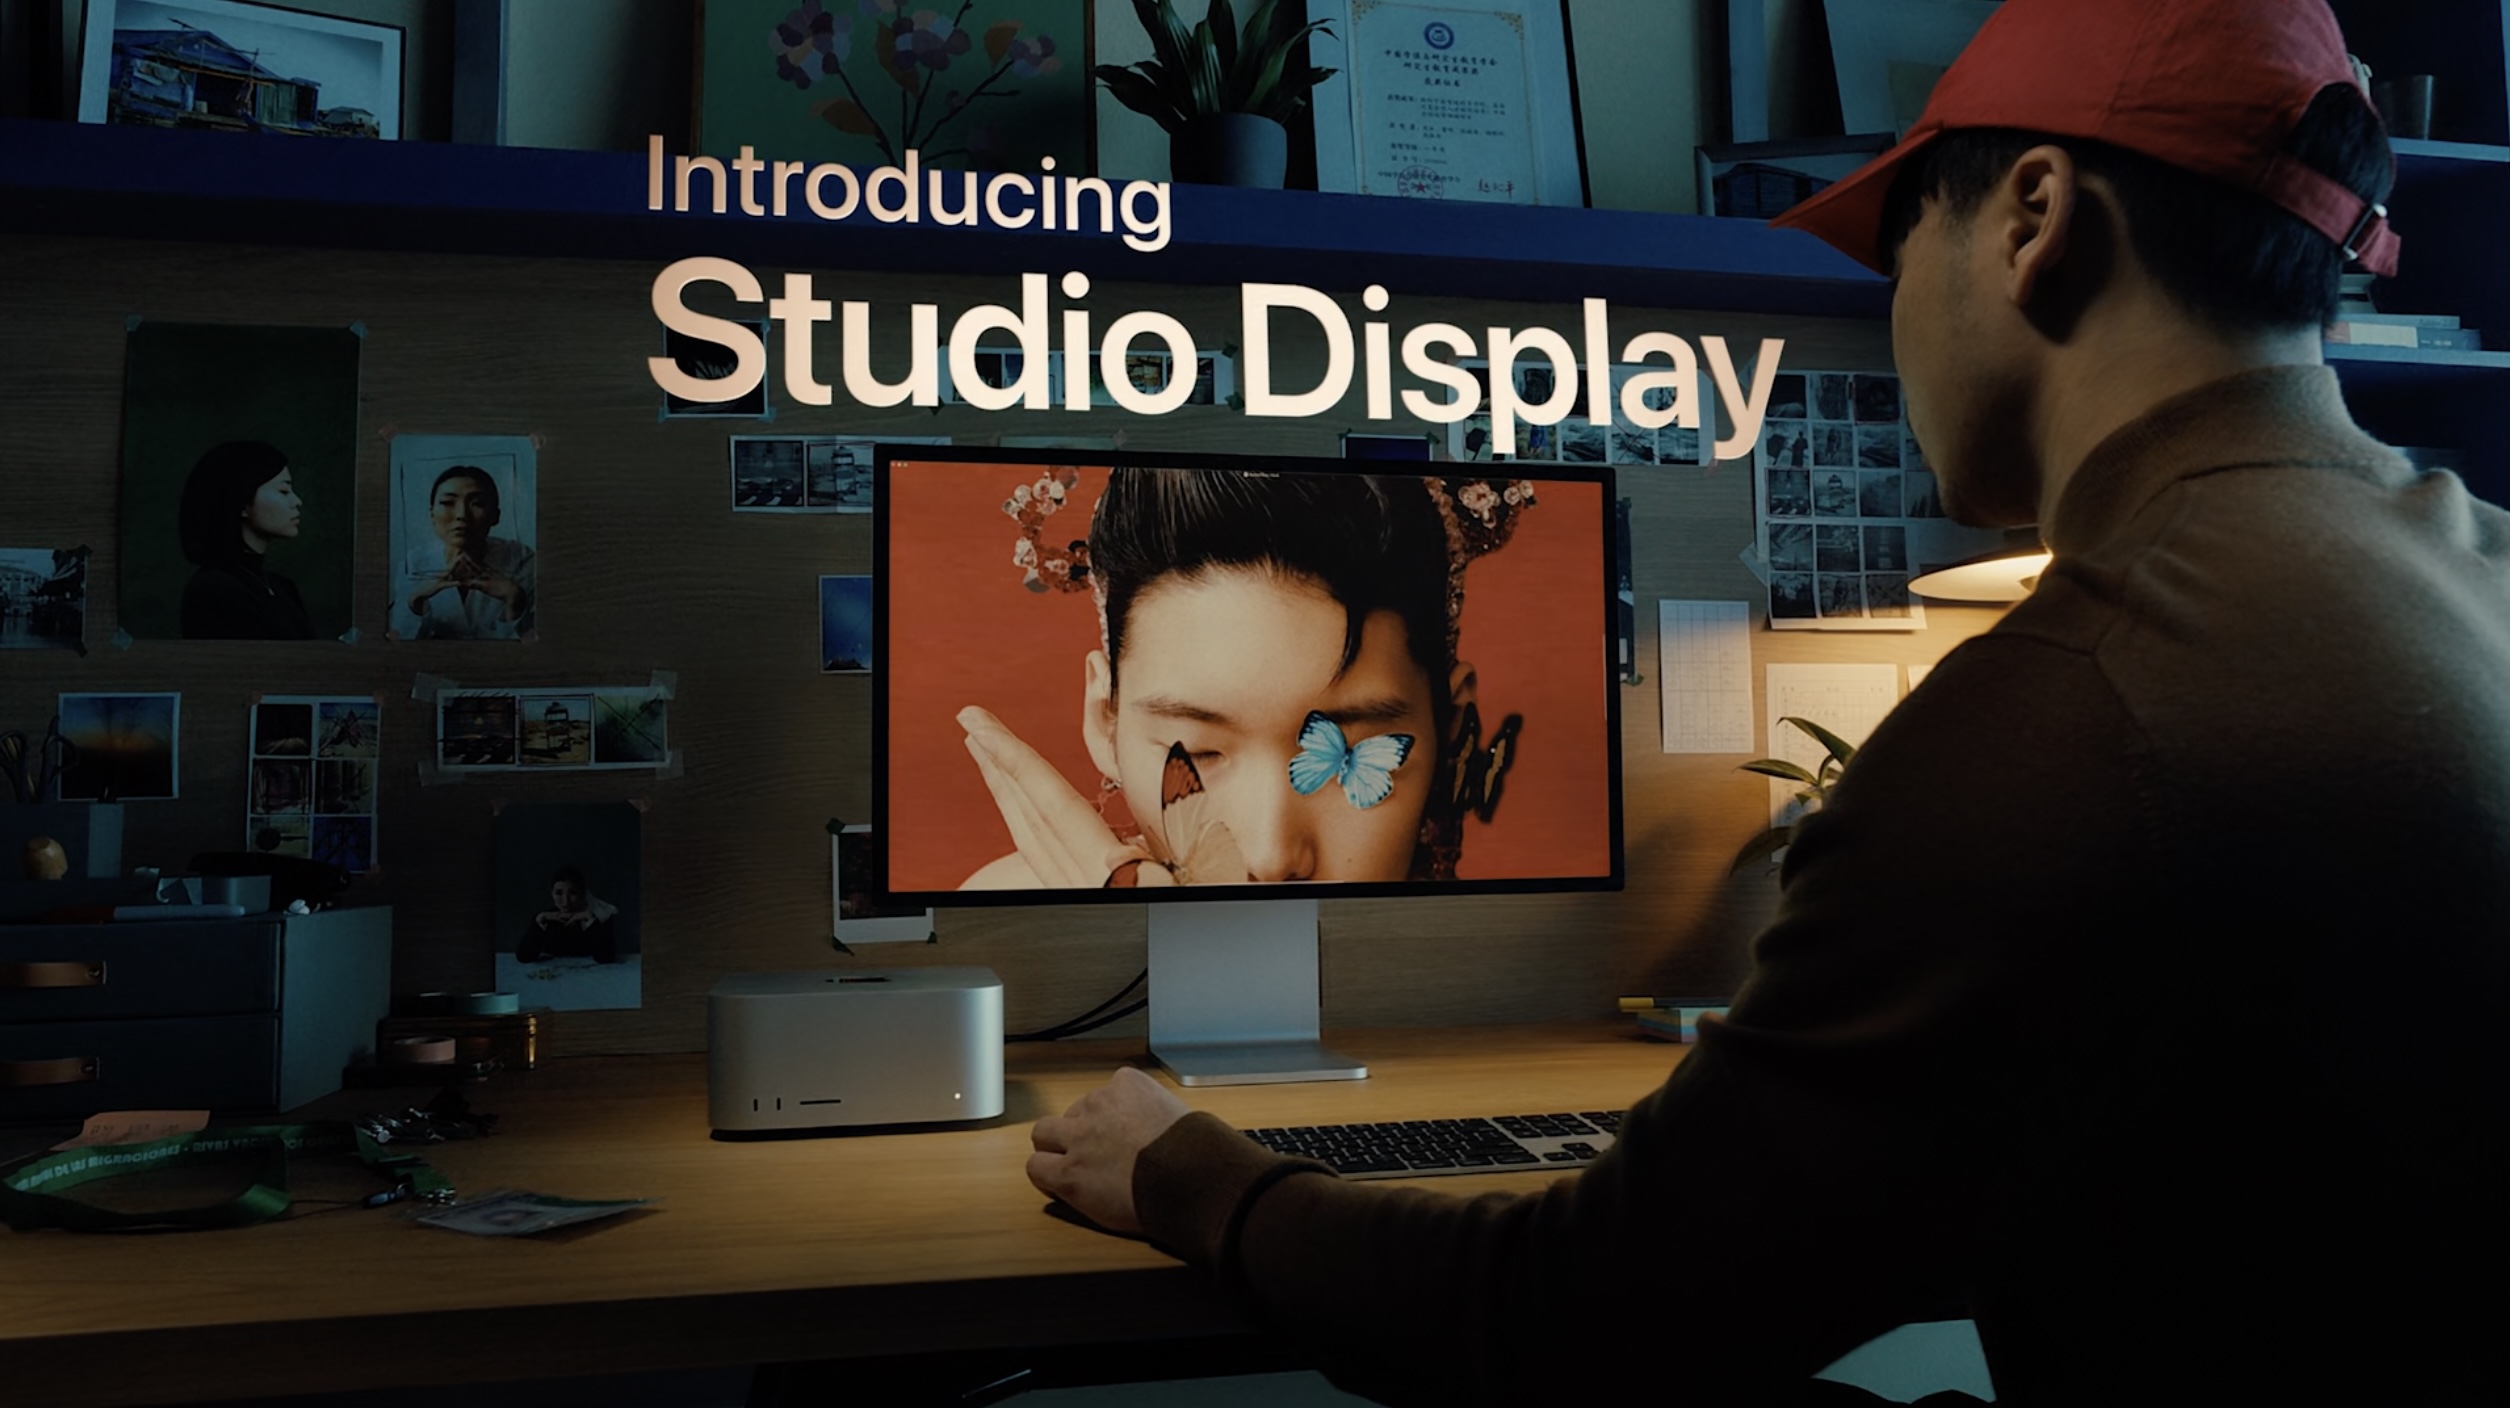 Apple Studio Display vs LG UltraFine and Pro Display XDR launches